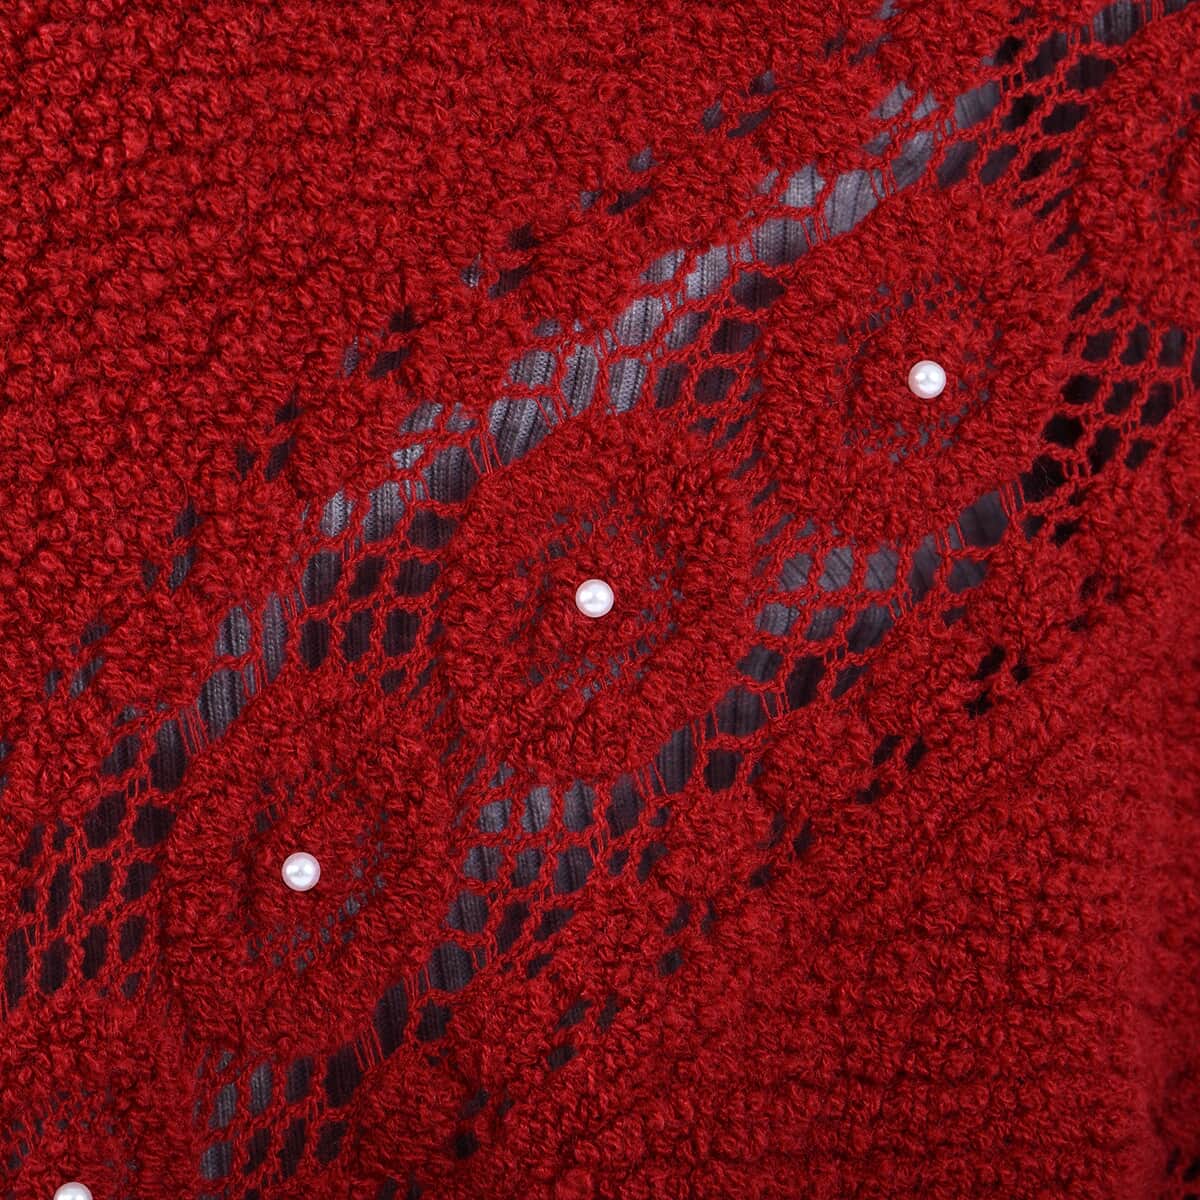 Red Diamond-Shaped Knitted Poncho with Beads (One Size Fits Most) image number 3